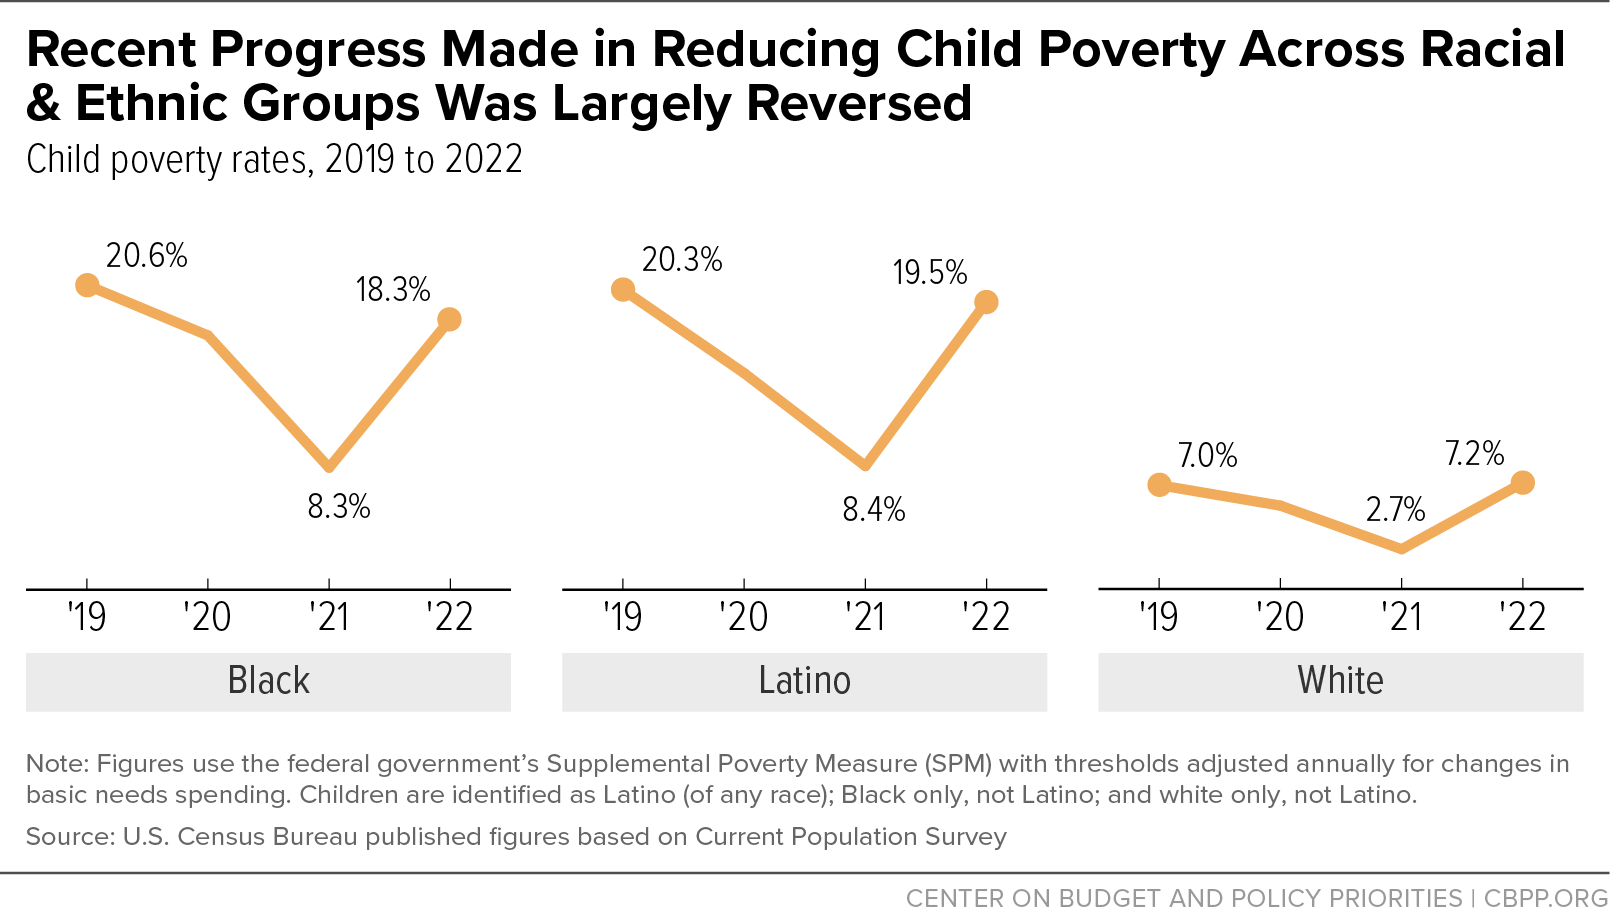 Recent Progress Made in Reducing Child Poverty Across Racial & Ethnic Groups Was Largely Reversed